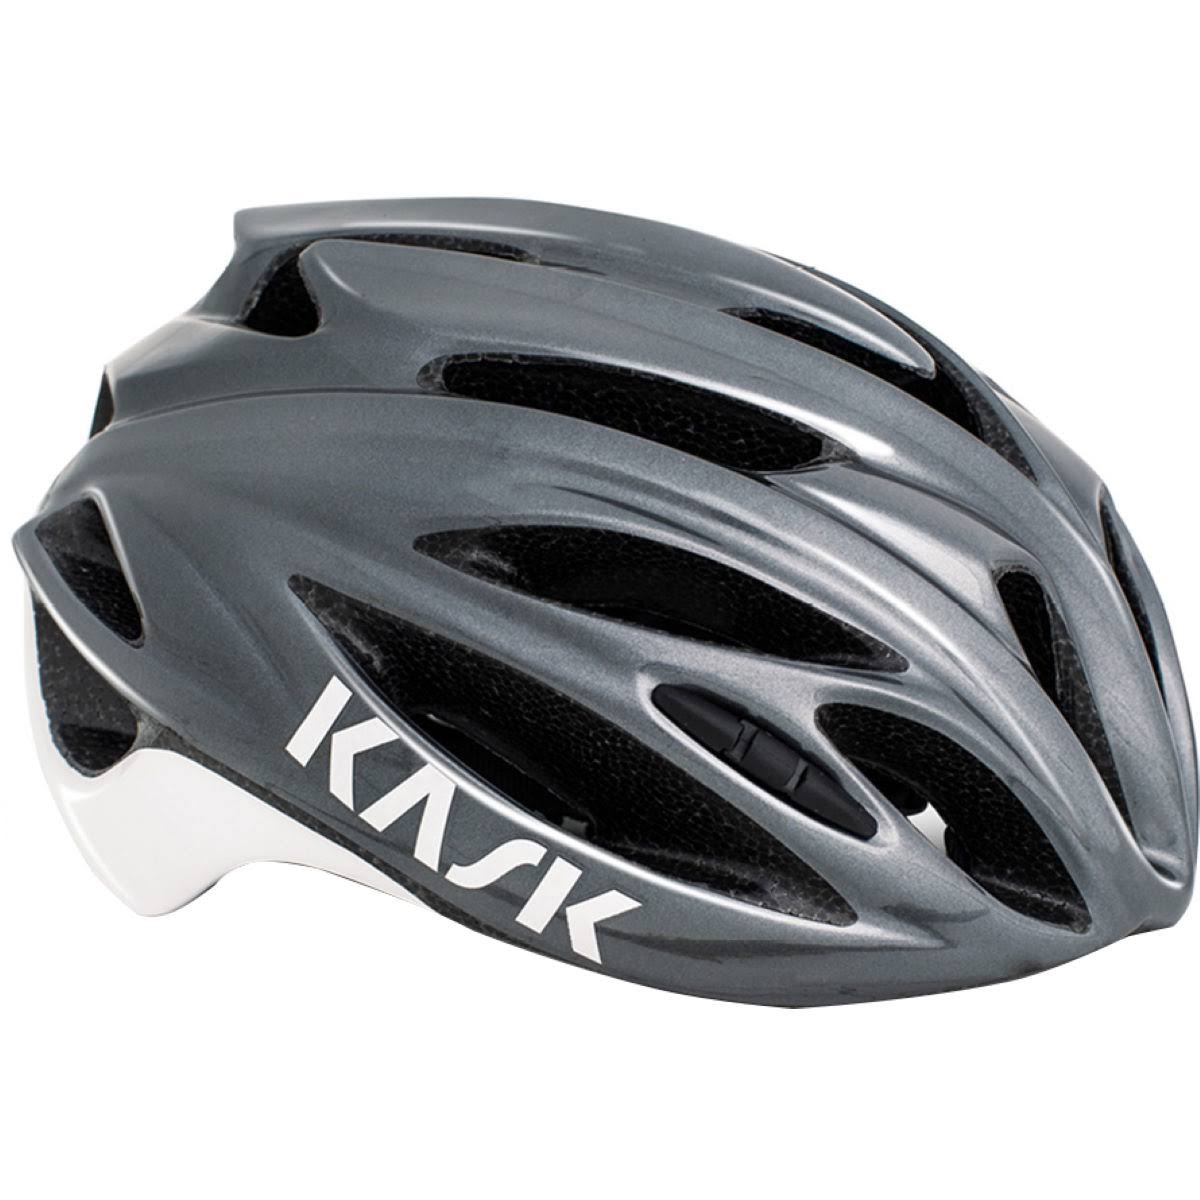 Kask Rapido Road Cycling Helmet - Anthracite, Large